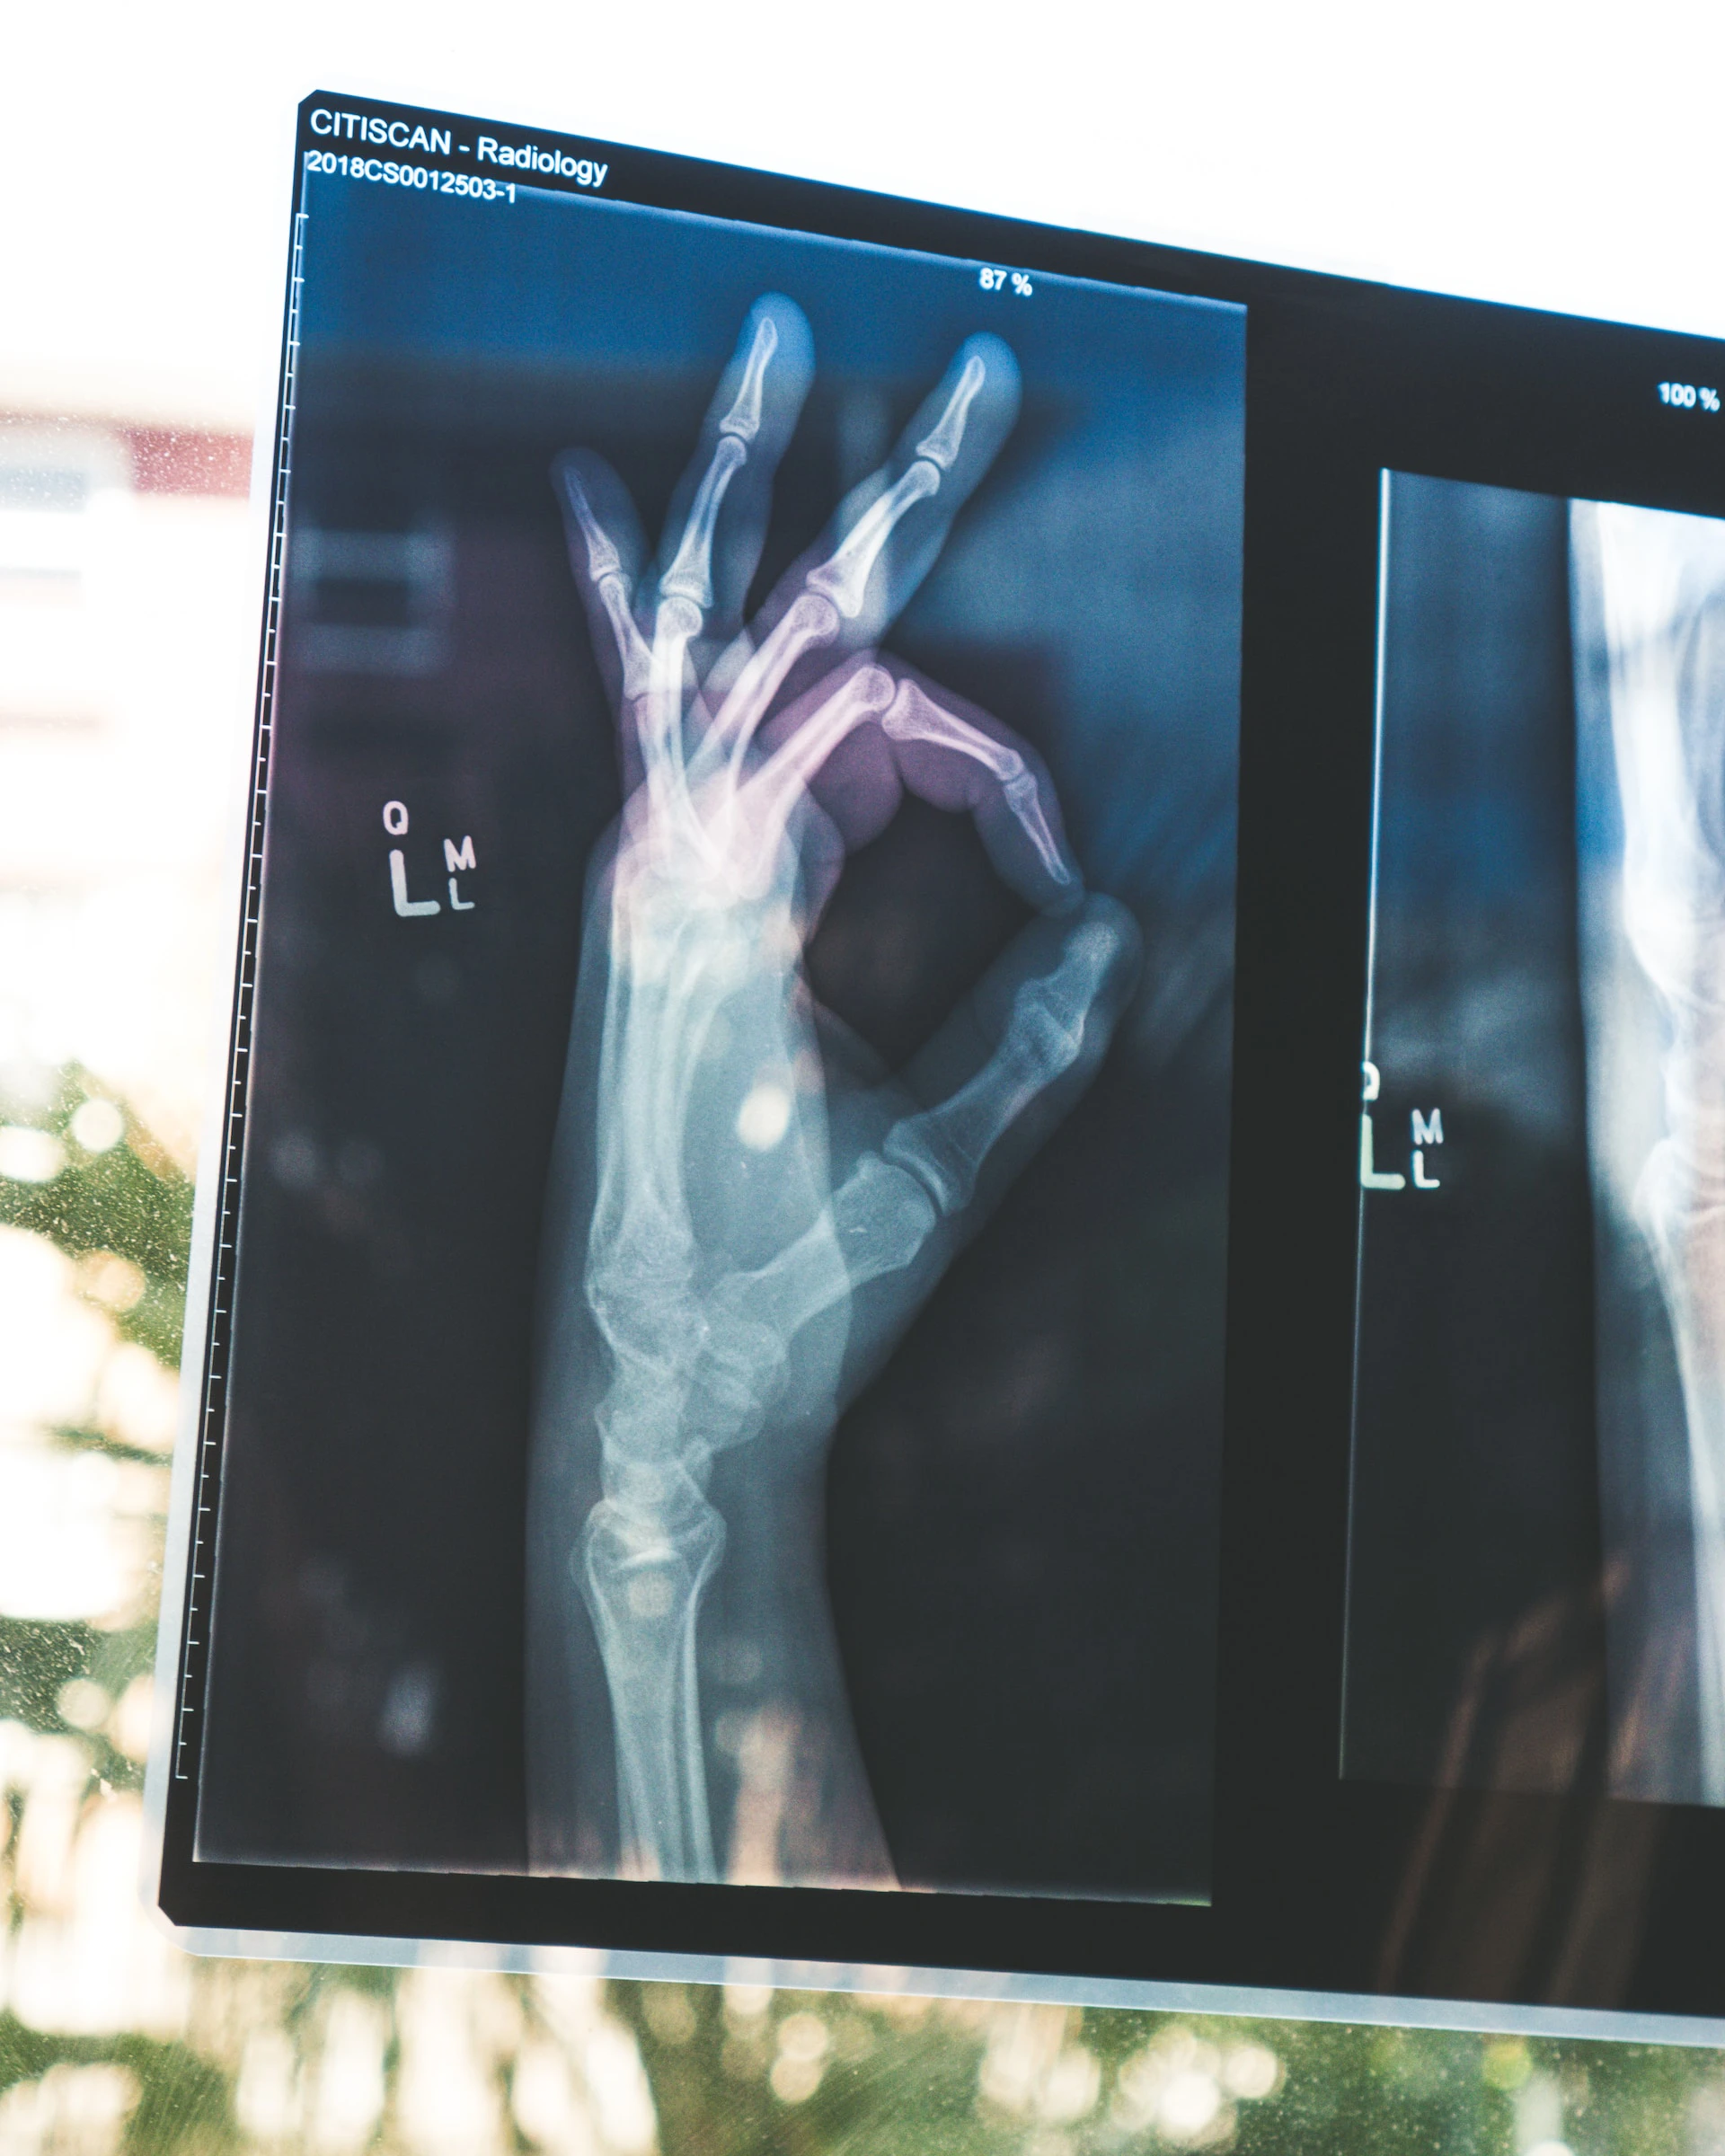 x-ray of a hand giving the okay symbol